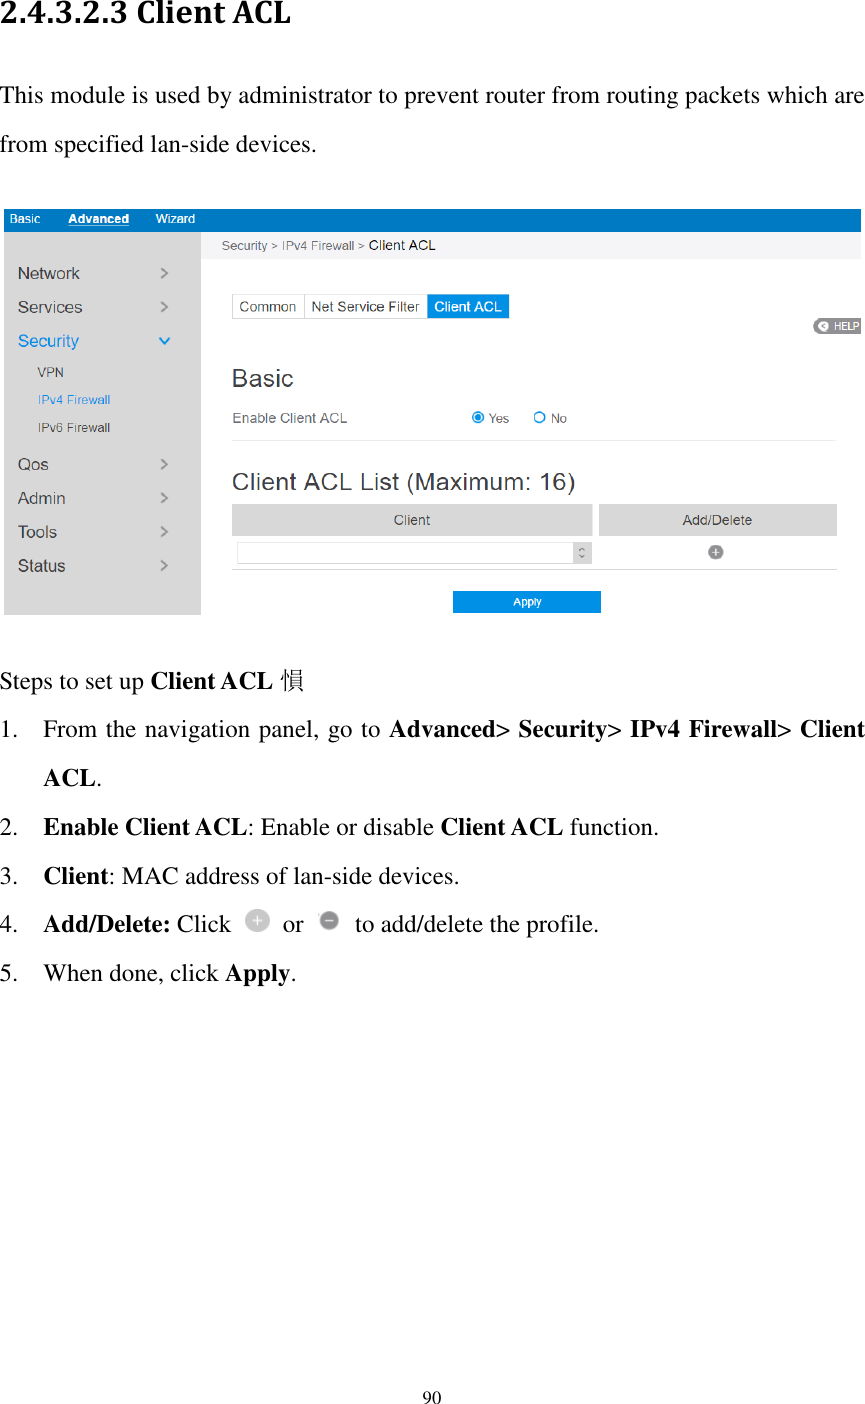  90  2.4.3.2.3 Client ACL This module is used by administrator to prevent router from routing packets which are from specified lan-side devices.      Steps to set up Client ACL 愪 1. From the navigation panel, go to Advanced&gt; Security&gt; IPv4 Firewall&gt; Client ACL. 2. Enable Client ACL: Enable or disable Client ACL function. 3. Client: MAC address of lan-side devices. 4. Add/Delete: Click    or    to add/delete the profile. 5. When done, click Apply. 